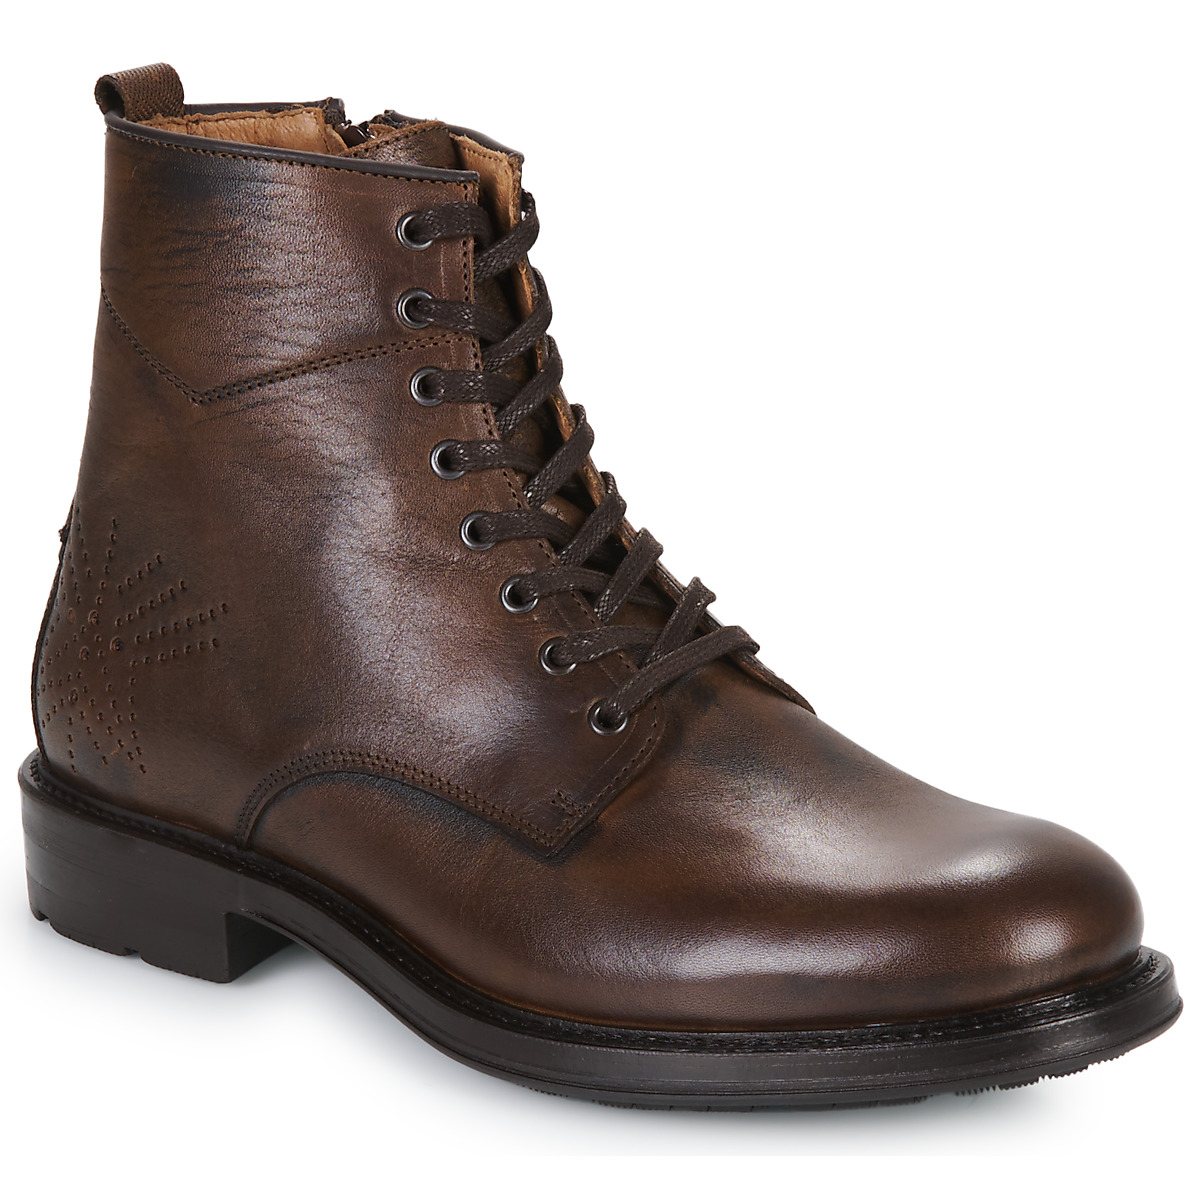 Chaussures Homme Boots KOST JIMMY FO VGT 